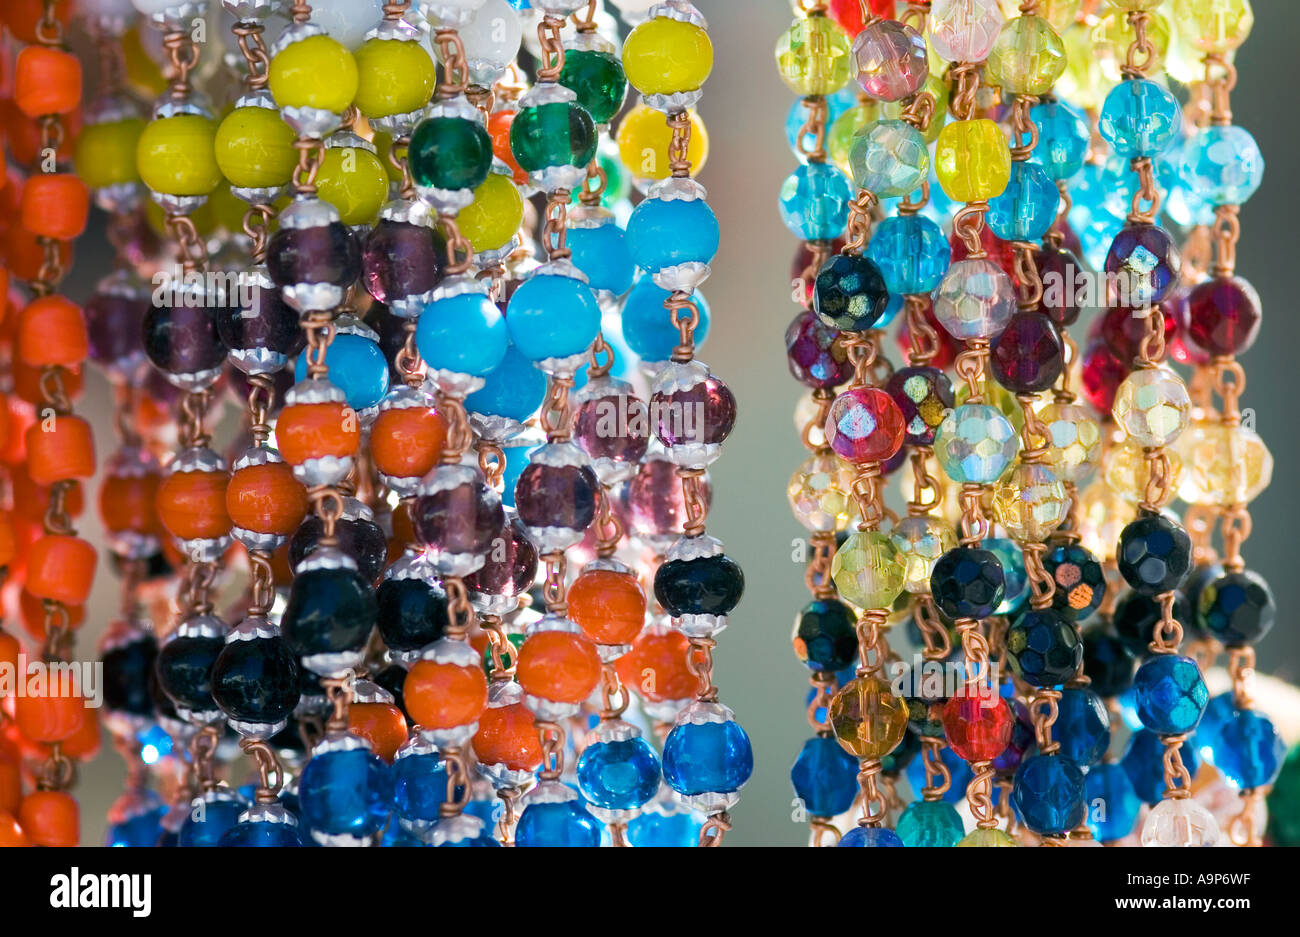 Coloured japamala prayer beads on a stall in India Stock Photo